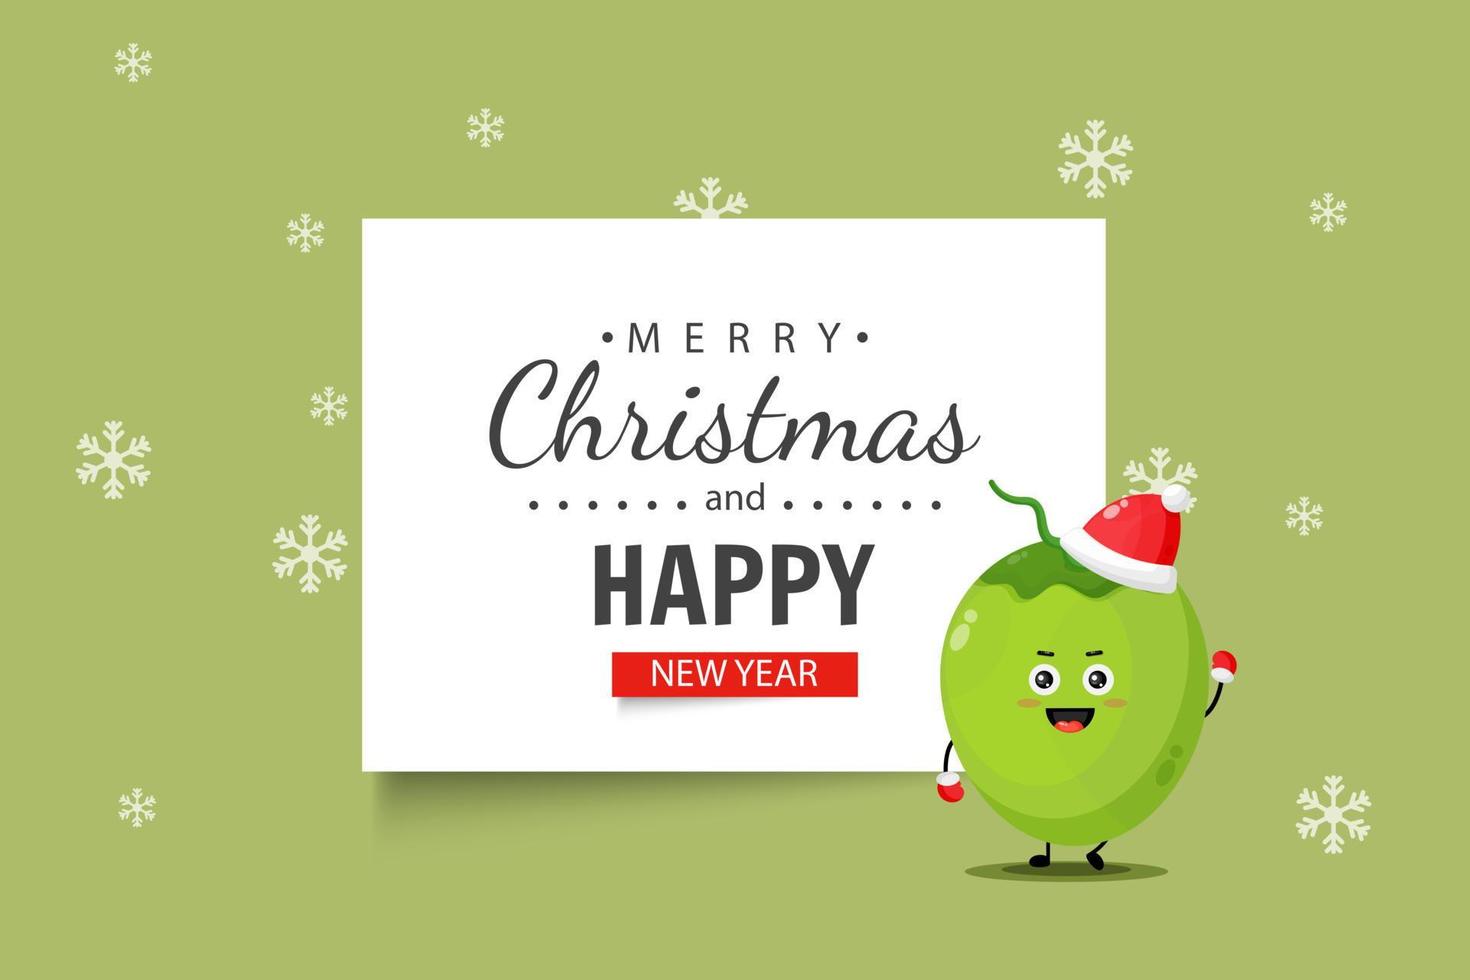 Cute coconut character wishes you a Merry Christmas and Happy New Year vector